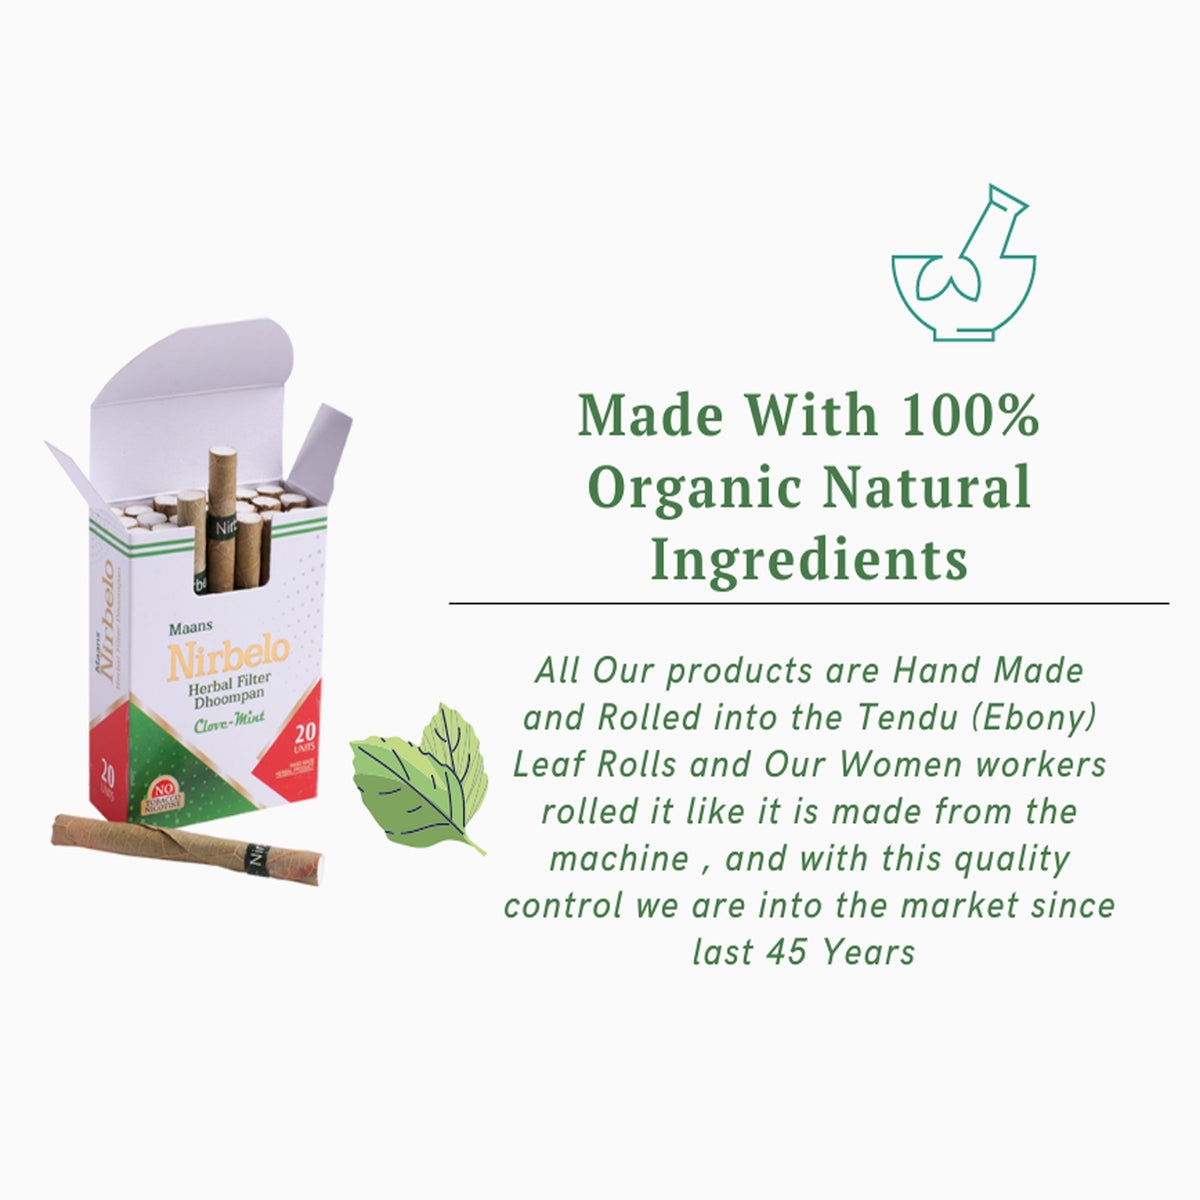 Nirbelo Herbal Filter Dhoompan Clove Mint Flavor 100% Tobacco Free & Nicotine Free Cigarette Natural Organic Ingredients for Quit Smoking & Nature's Alternative to Tobacco